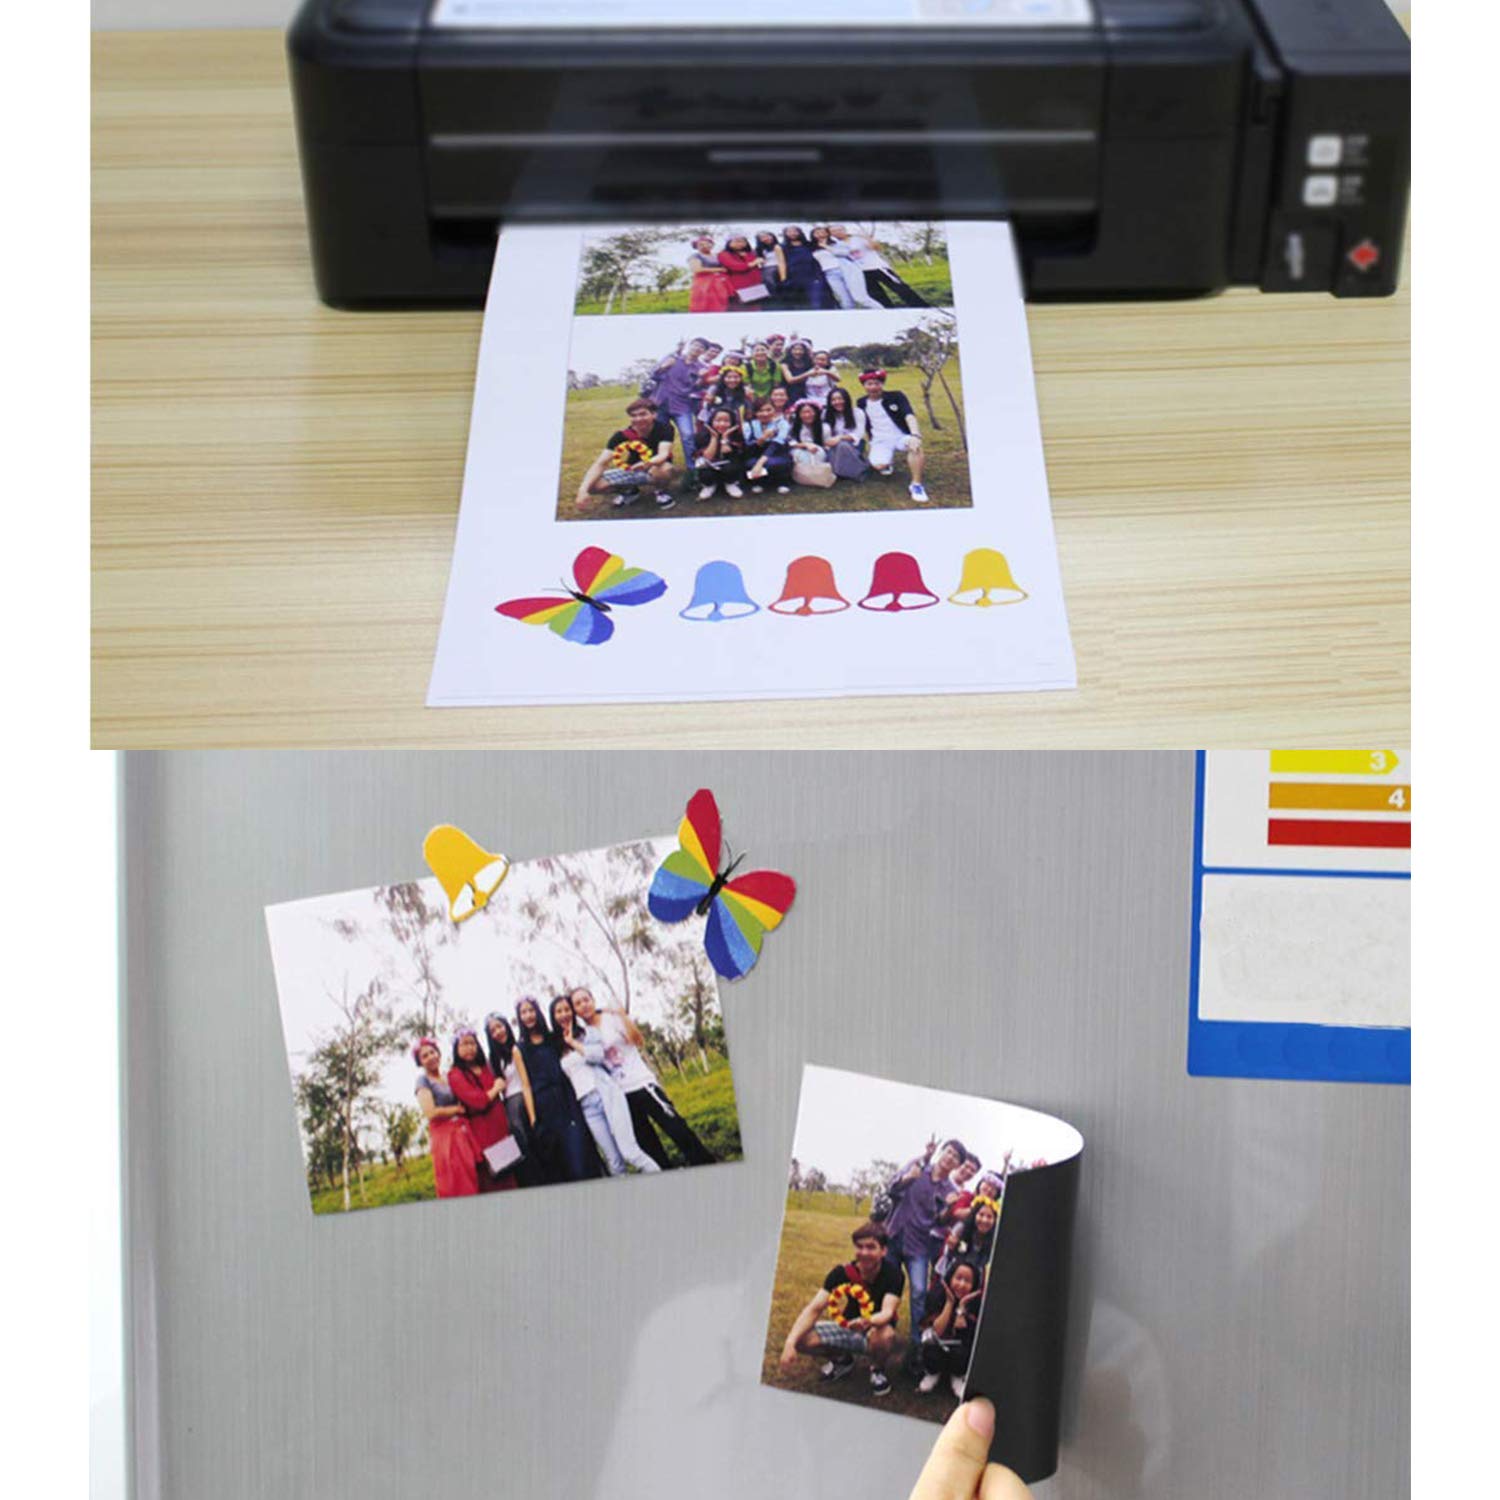 Magnetic Photo Paper 5 Sheets A4 Ideal Printing Several Magnets Photos Printer